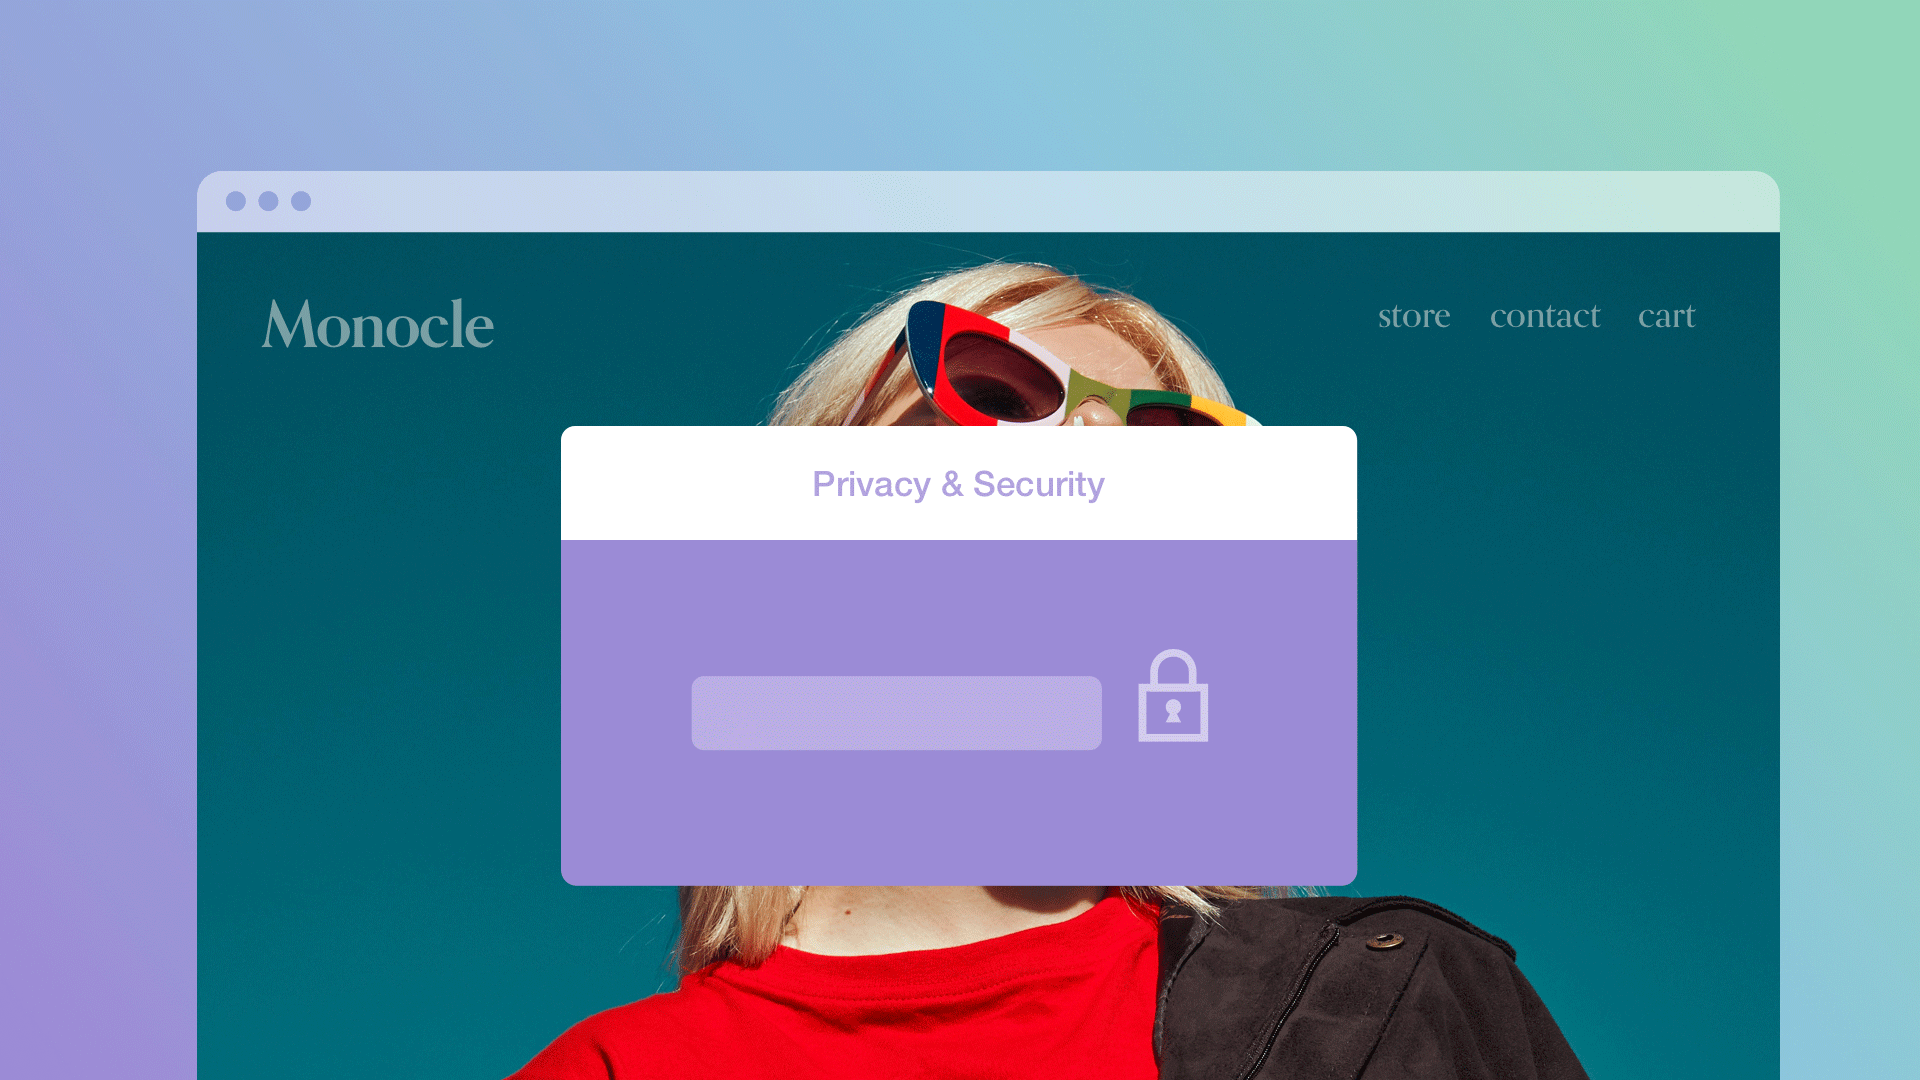 A computer pop-up modal showing a password entered and unlocking an account